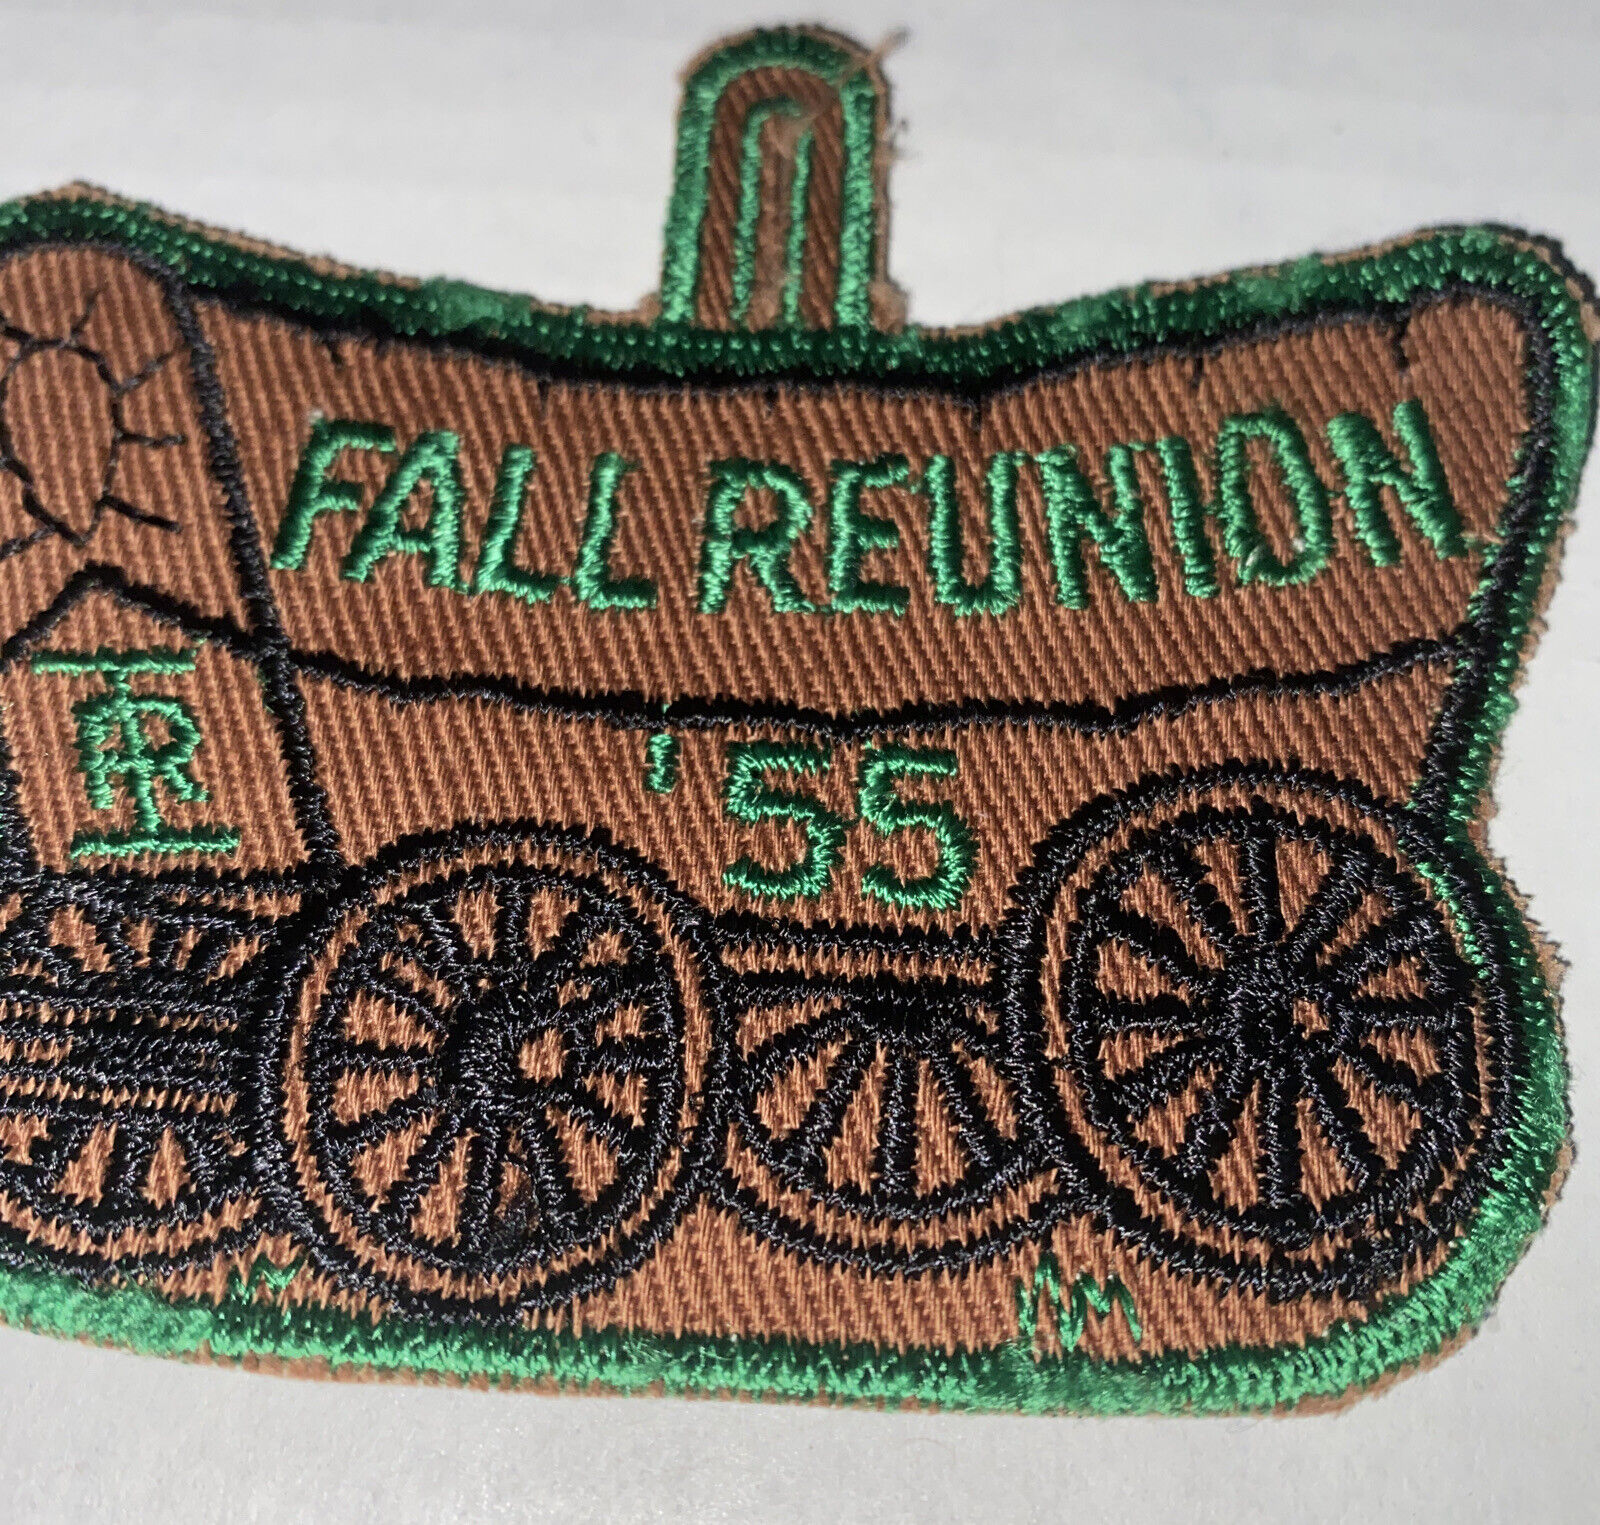 Vintage 1955 Shawnee Fall Reunion Embroidered Wagon Wheels Patch BSA Boy Scouts